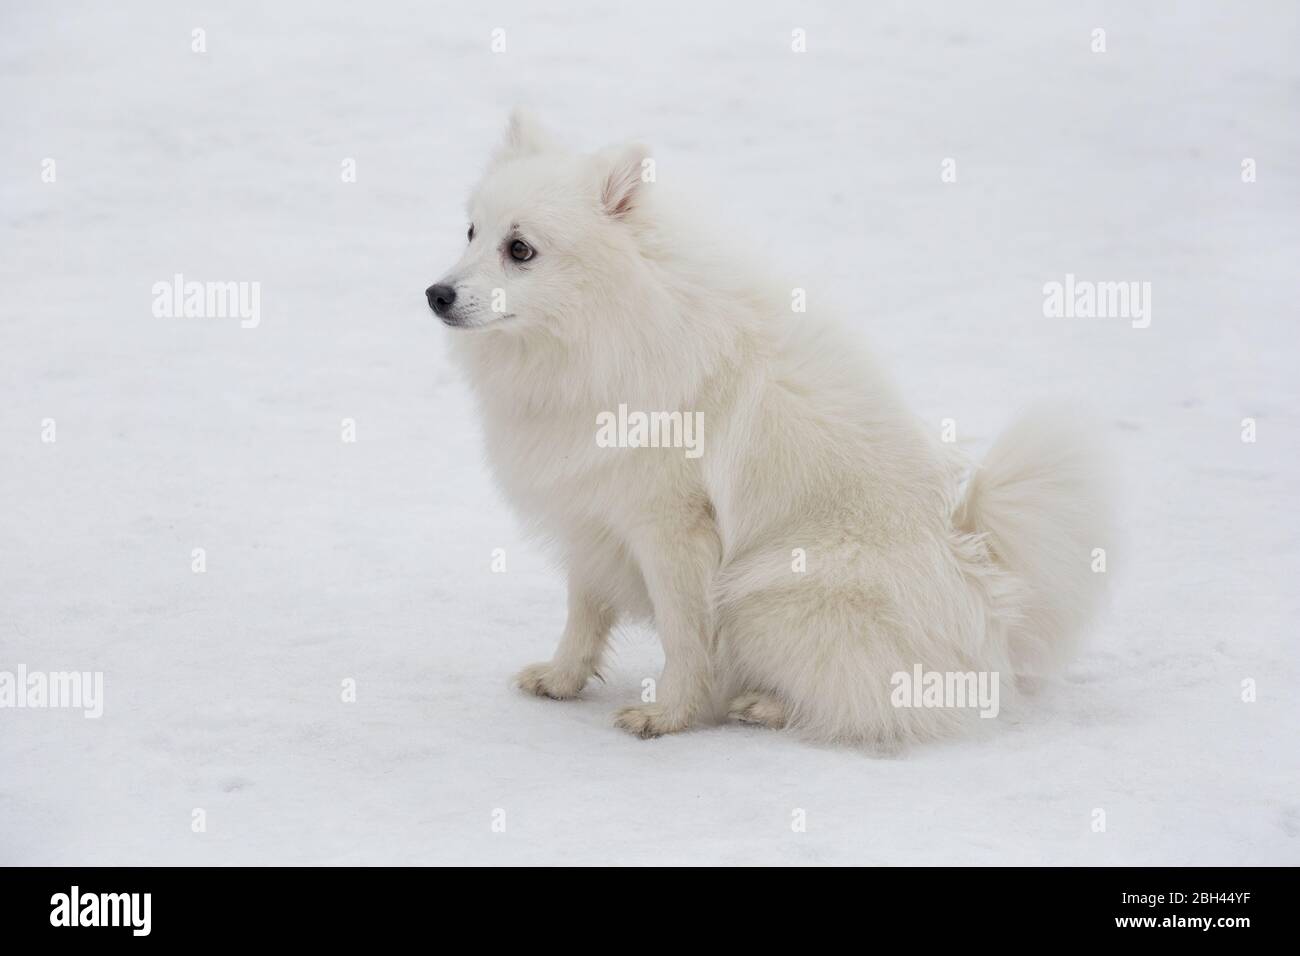 Cute japanese spitz puppy is sitting on a white snow in the winter park. Pet animals. Purebred dog. Stock Photo